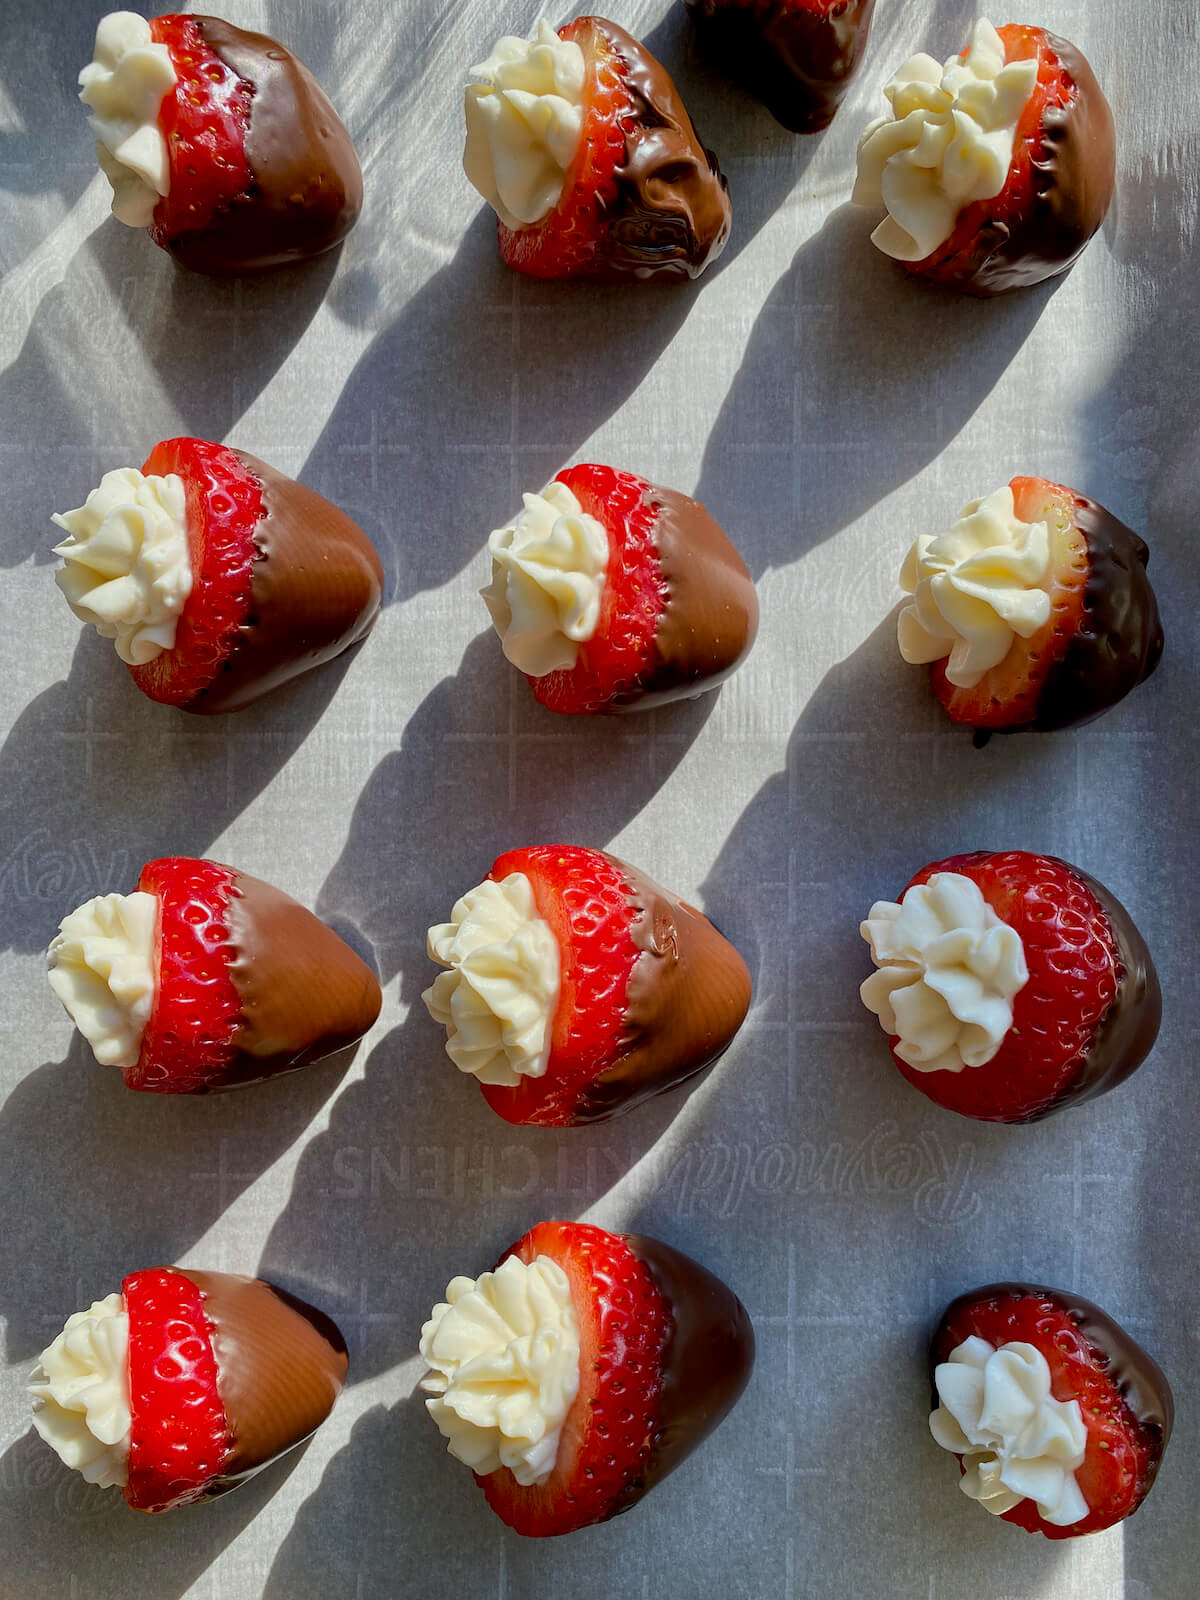 Chocolate covered cheesecake strawberries on a parchment-lined baking sheet.